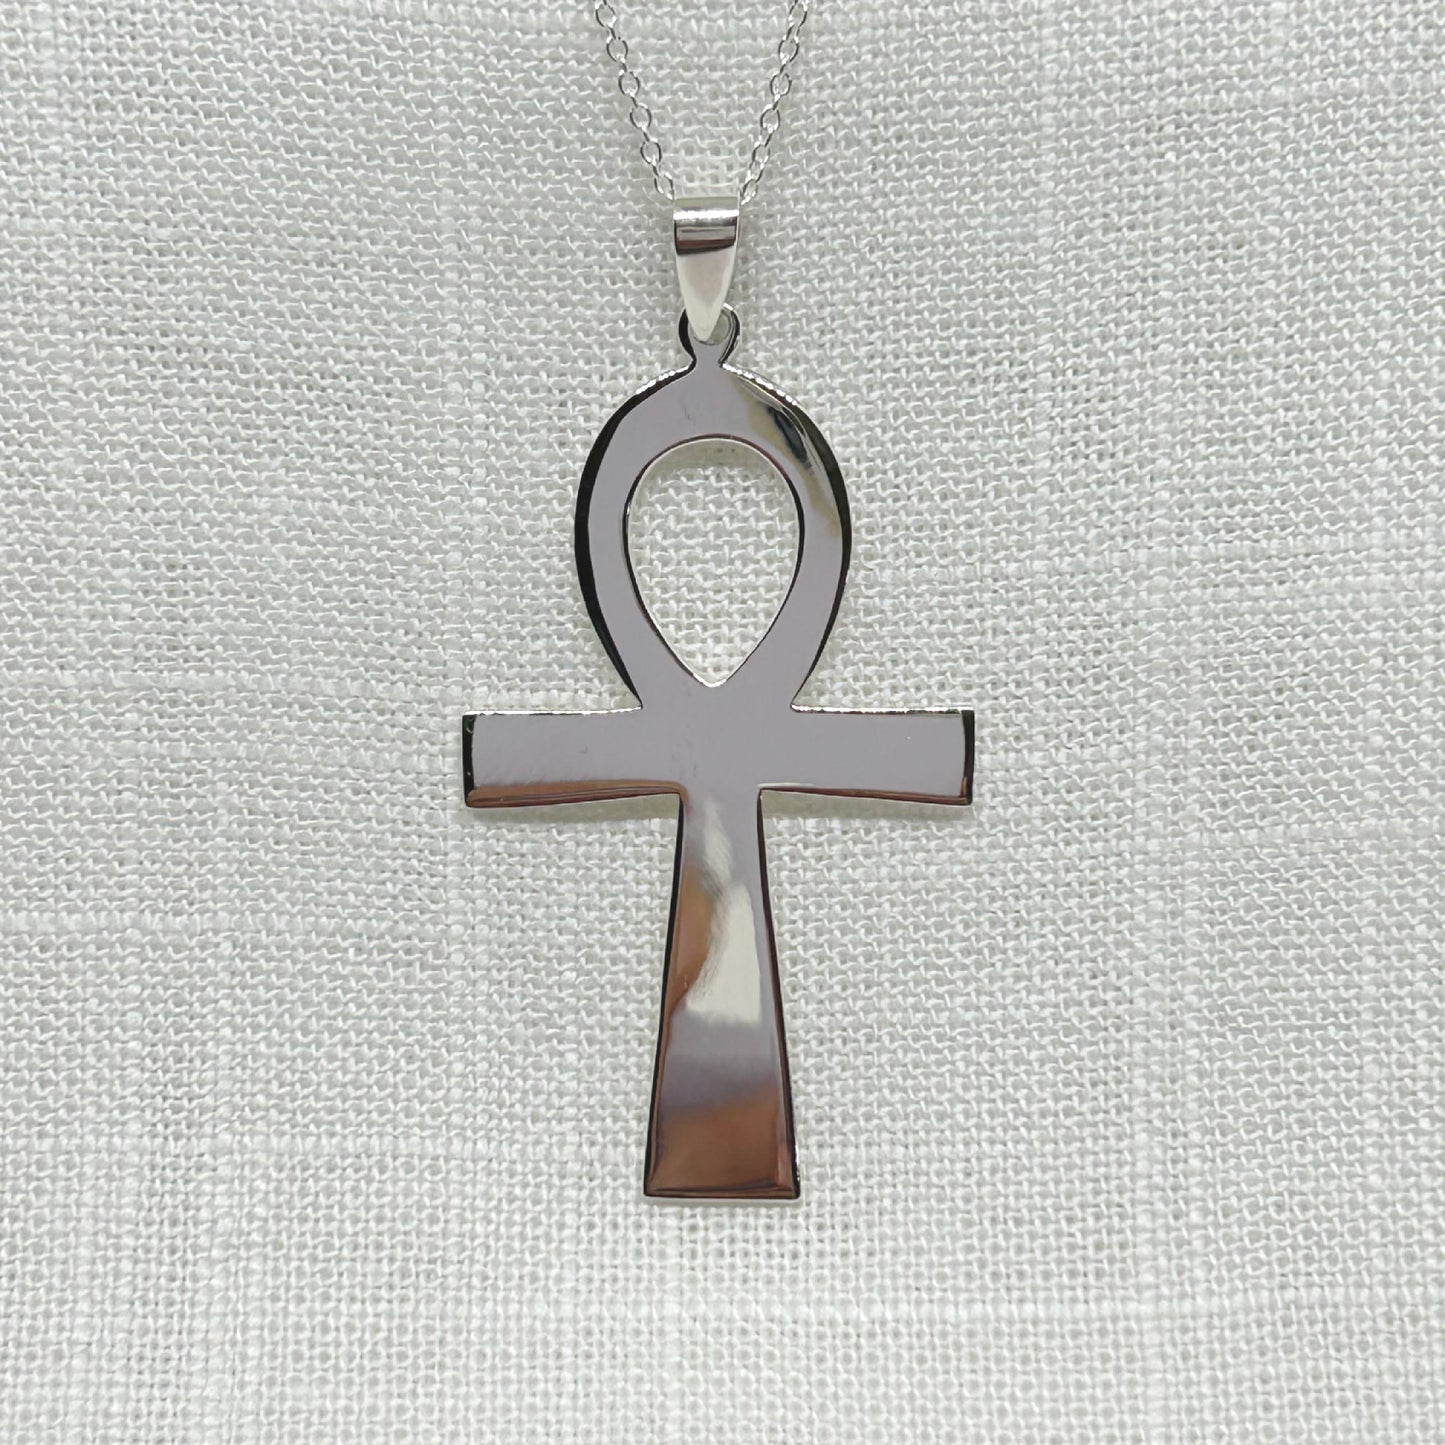 This beautiful extra large Ankh is highly polished and is approx 5.5cms long including the bale. Ankh Drop Earrings are also available. All pendants come supplied on a 20" 925 silver chain and arrives in a tarnish proof bag and gift box.